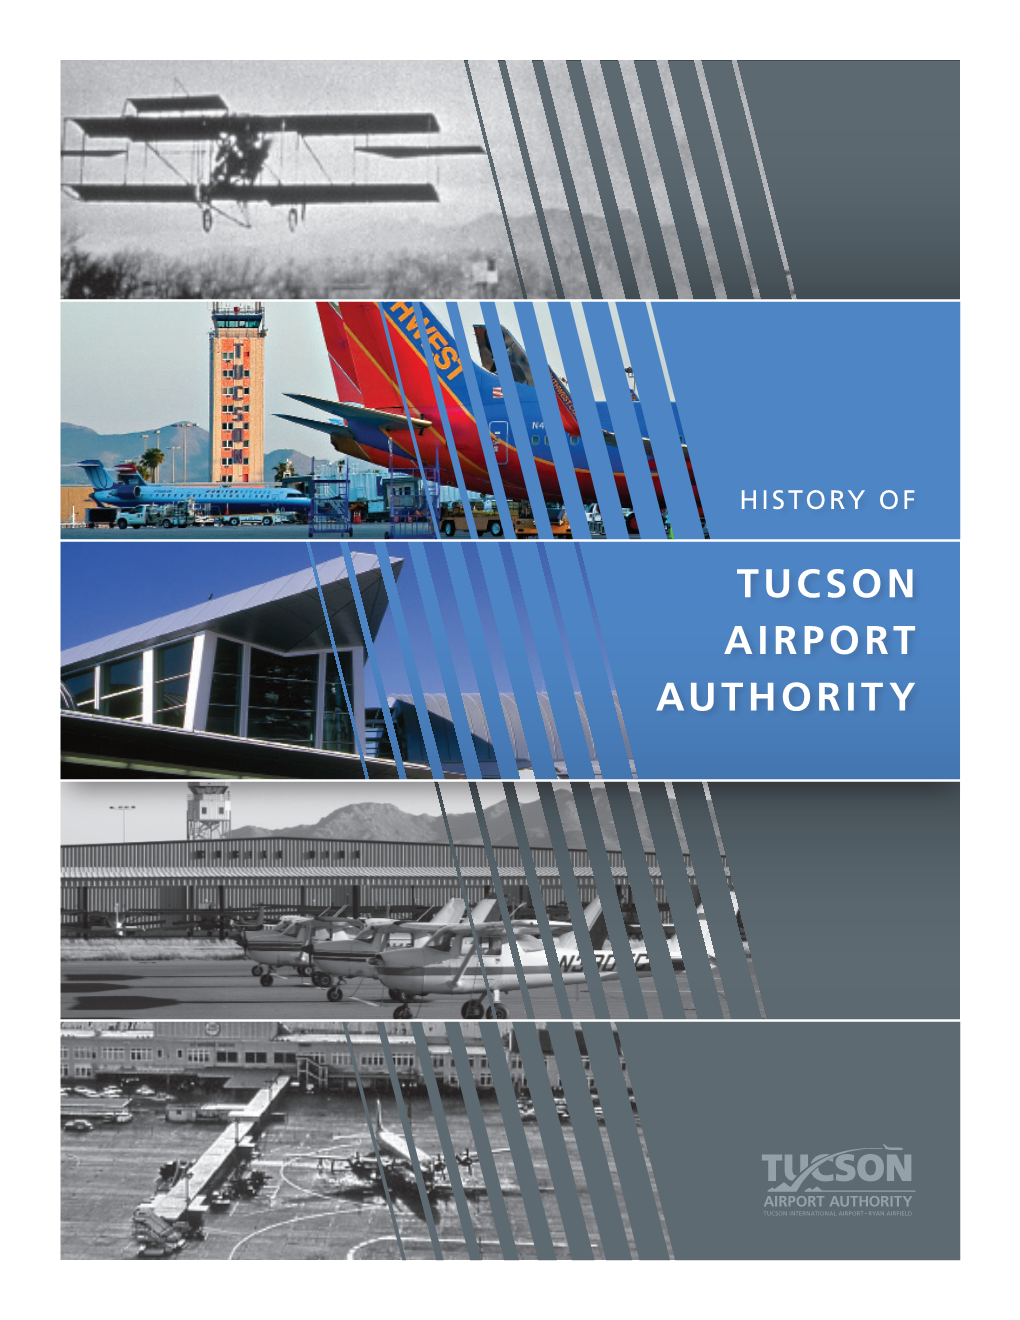 TUCSON AIRPORT AUTHORITY Charles Lindbergh Arrived in 1927 to Dedicate Tucson Aviation in Tucson: Municipal Airport